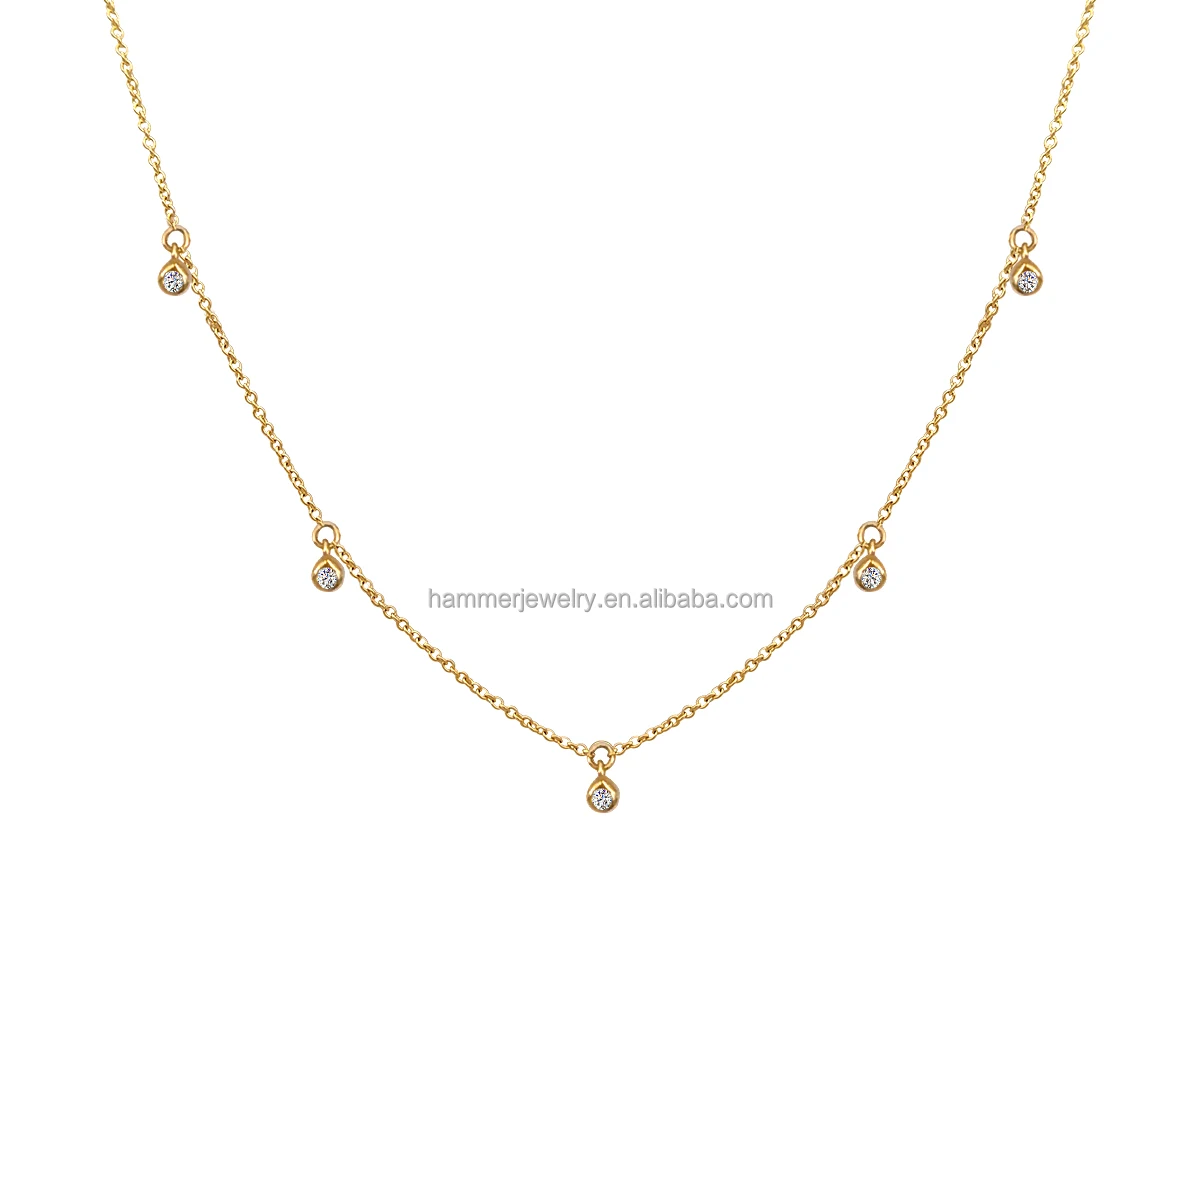 

AU585 Gold Necklace 14K Solid Gold and Lab-Grown Diamond Bezel Setting Charm Wholesale Manufacture Jewelry